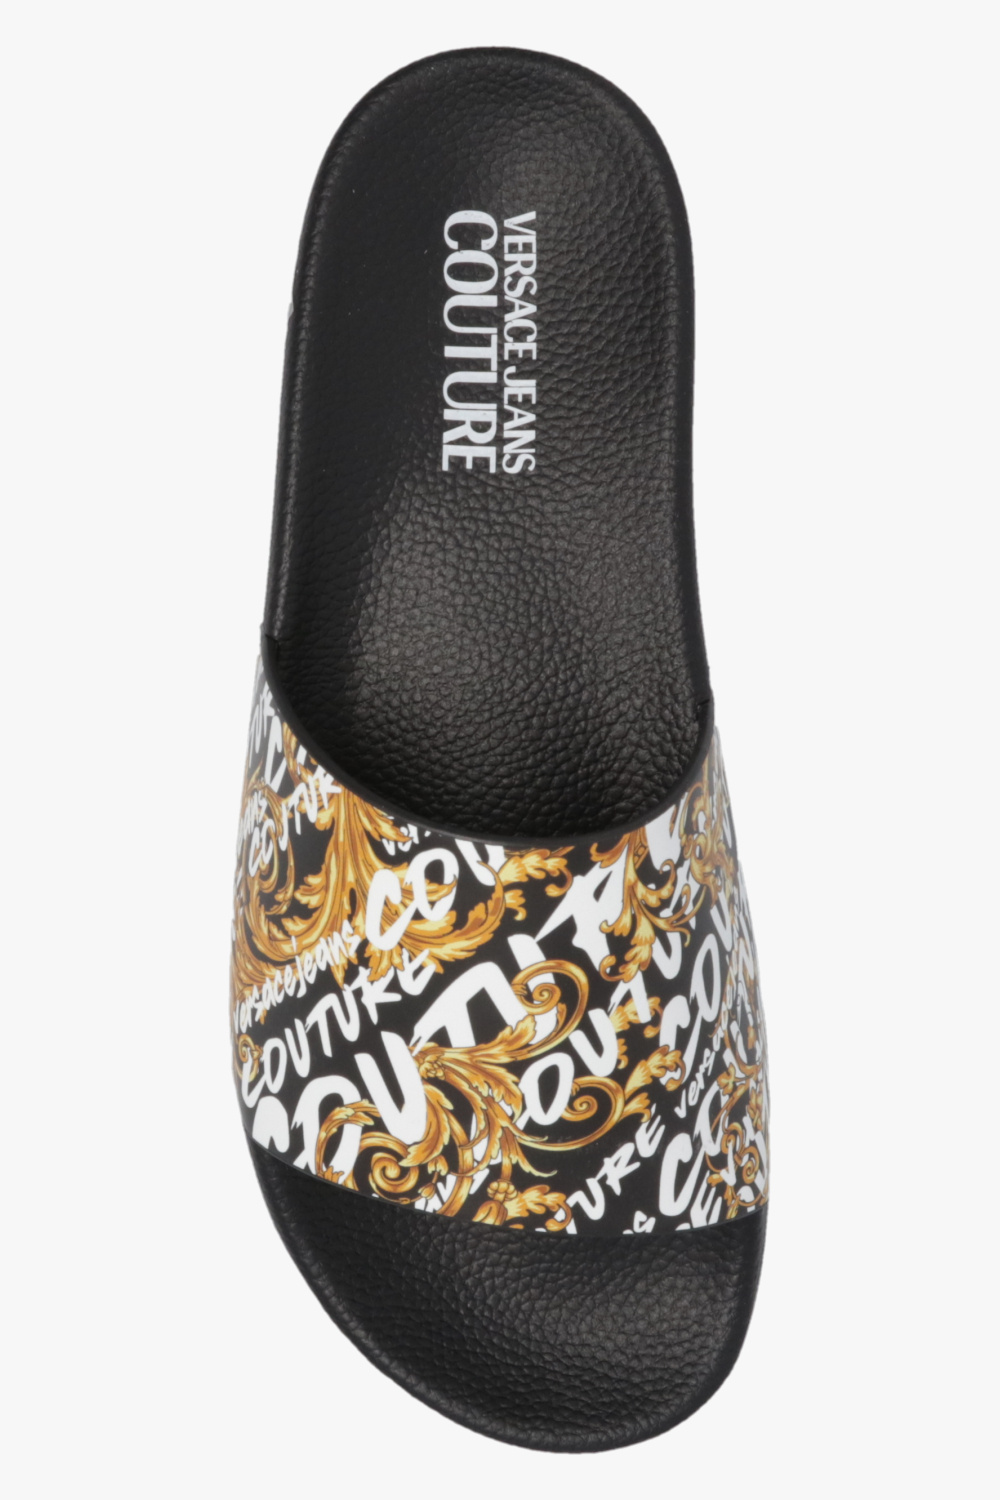 Versace Jeans Couture Patterned slides